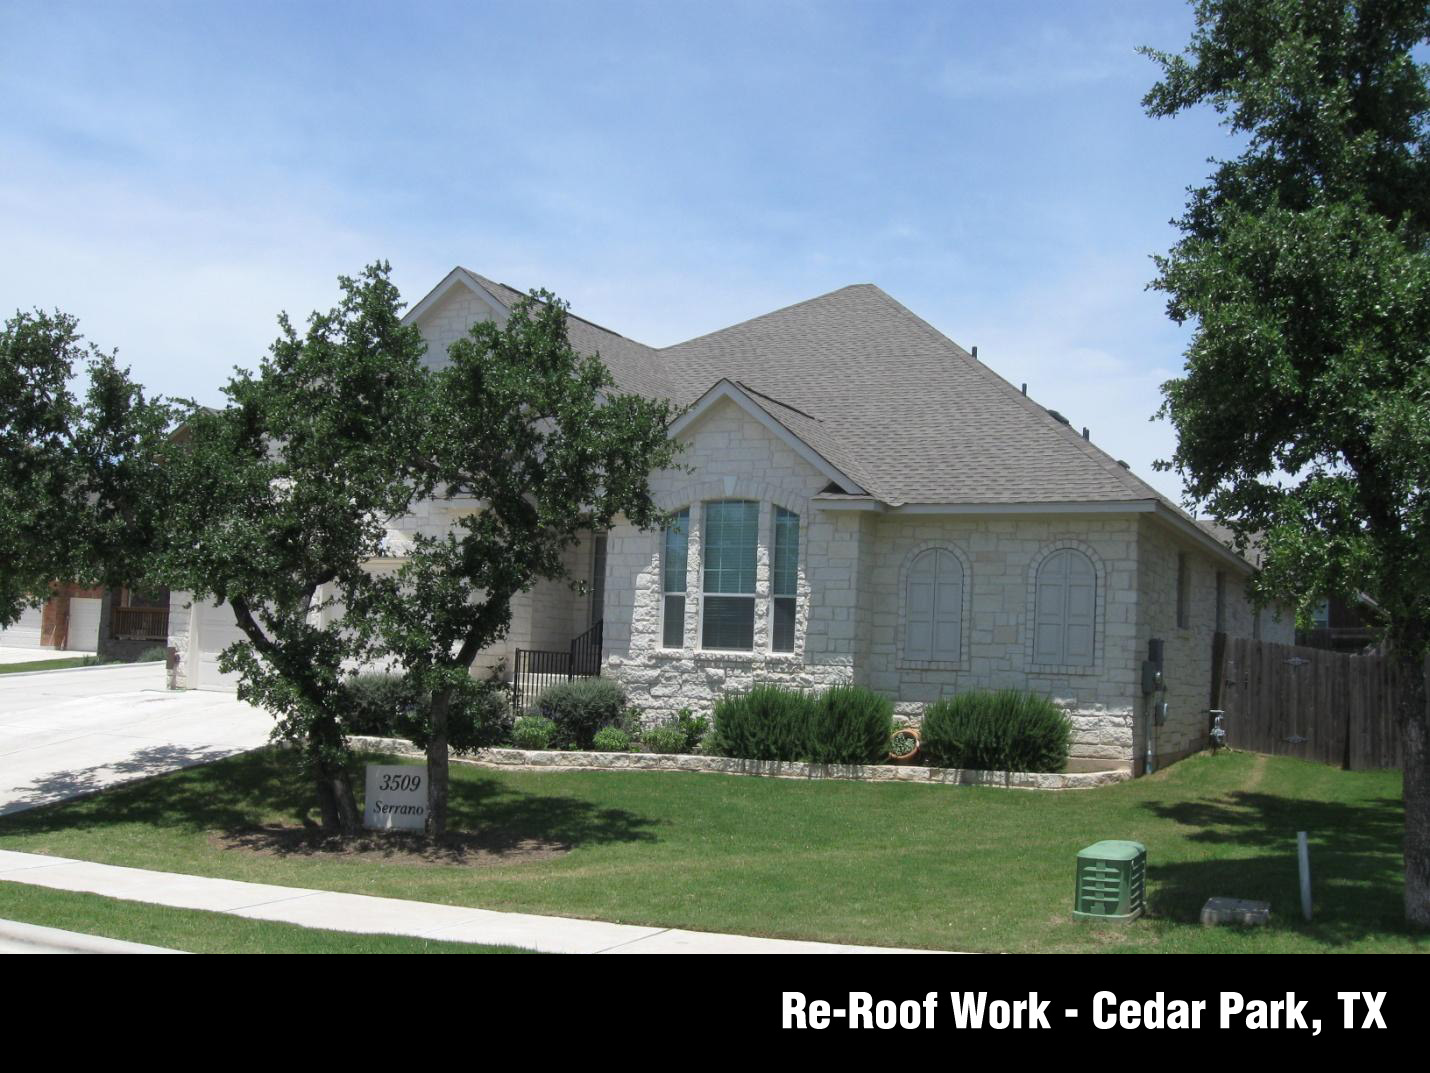 A Re-Roof project performed in Cedar Park, TX by All Star Roofing